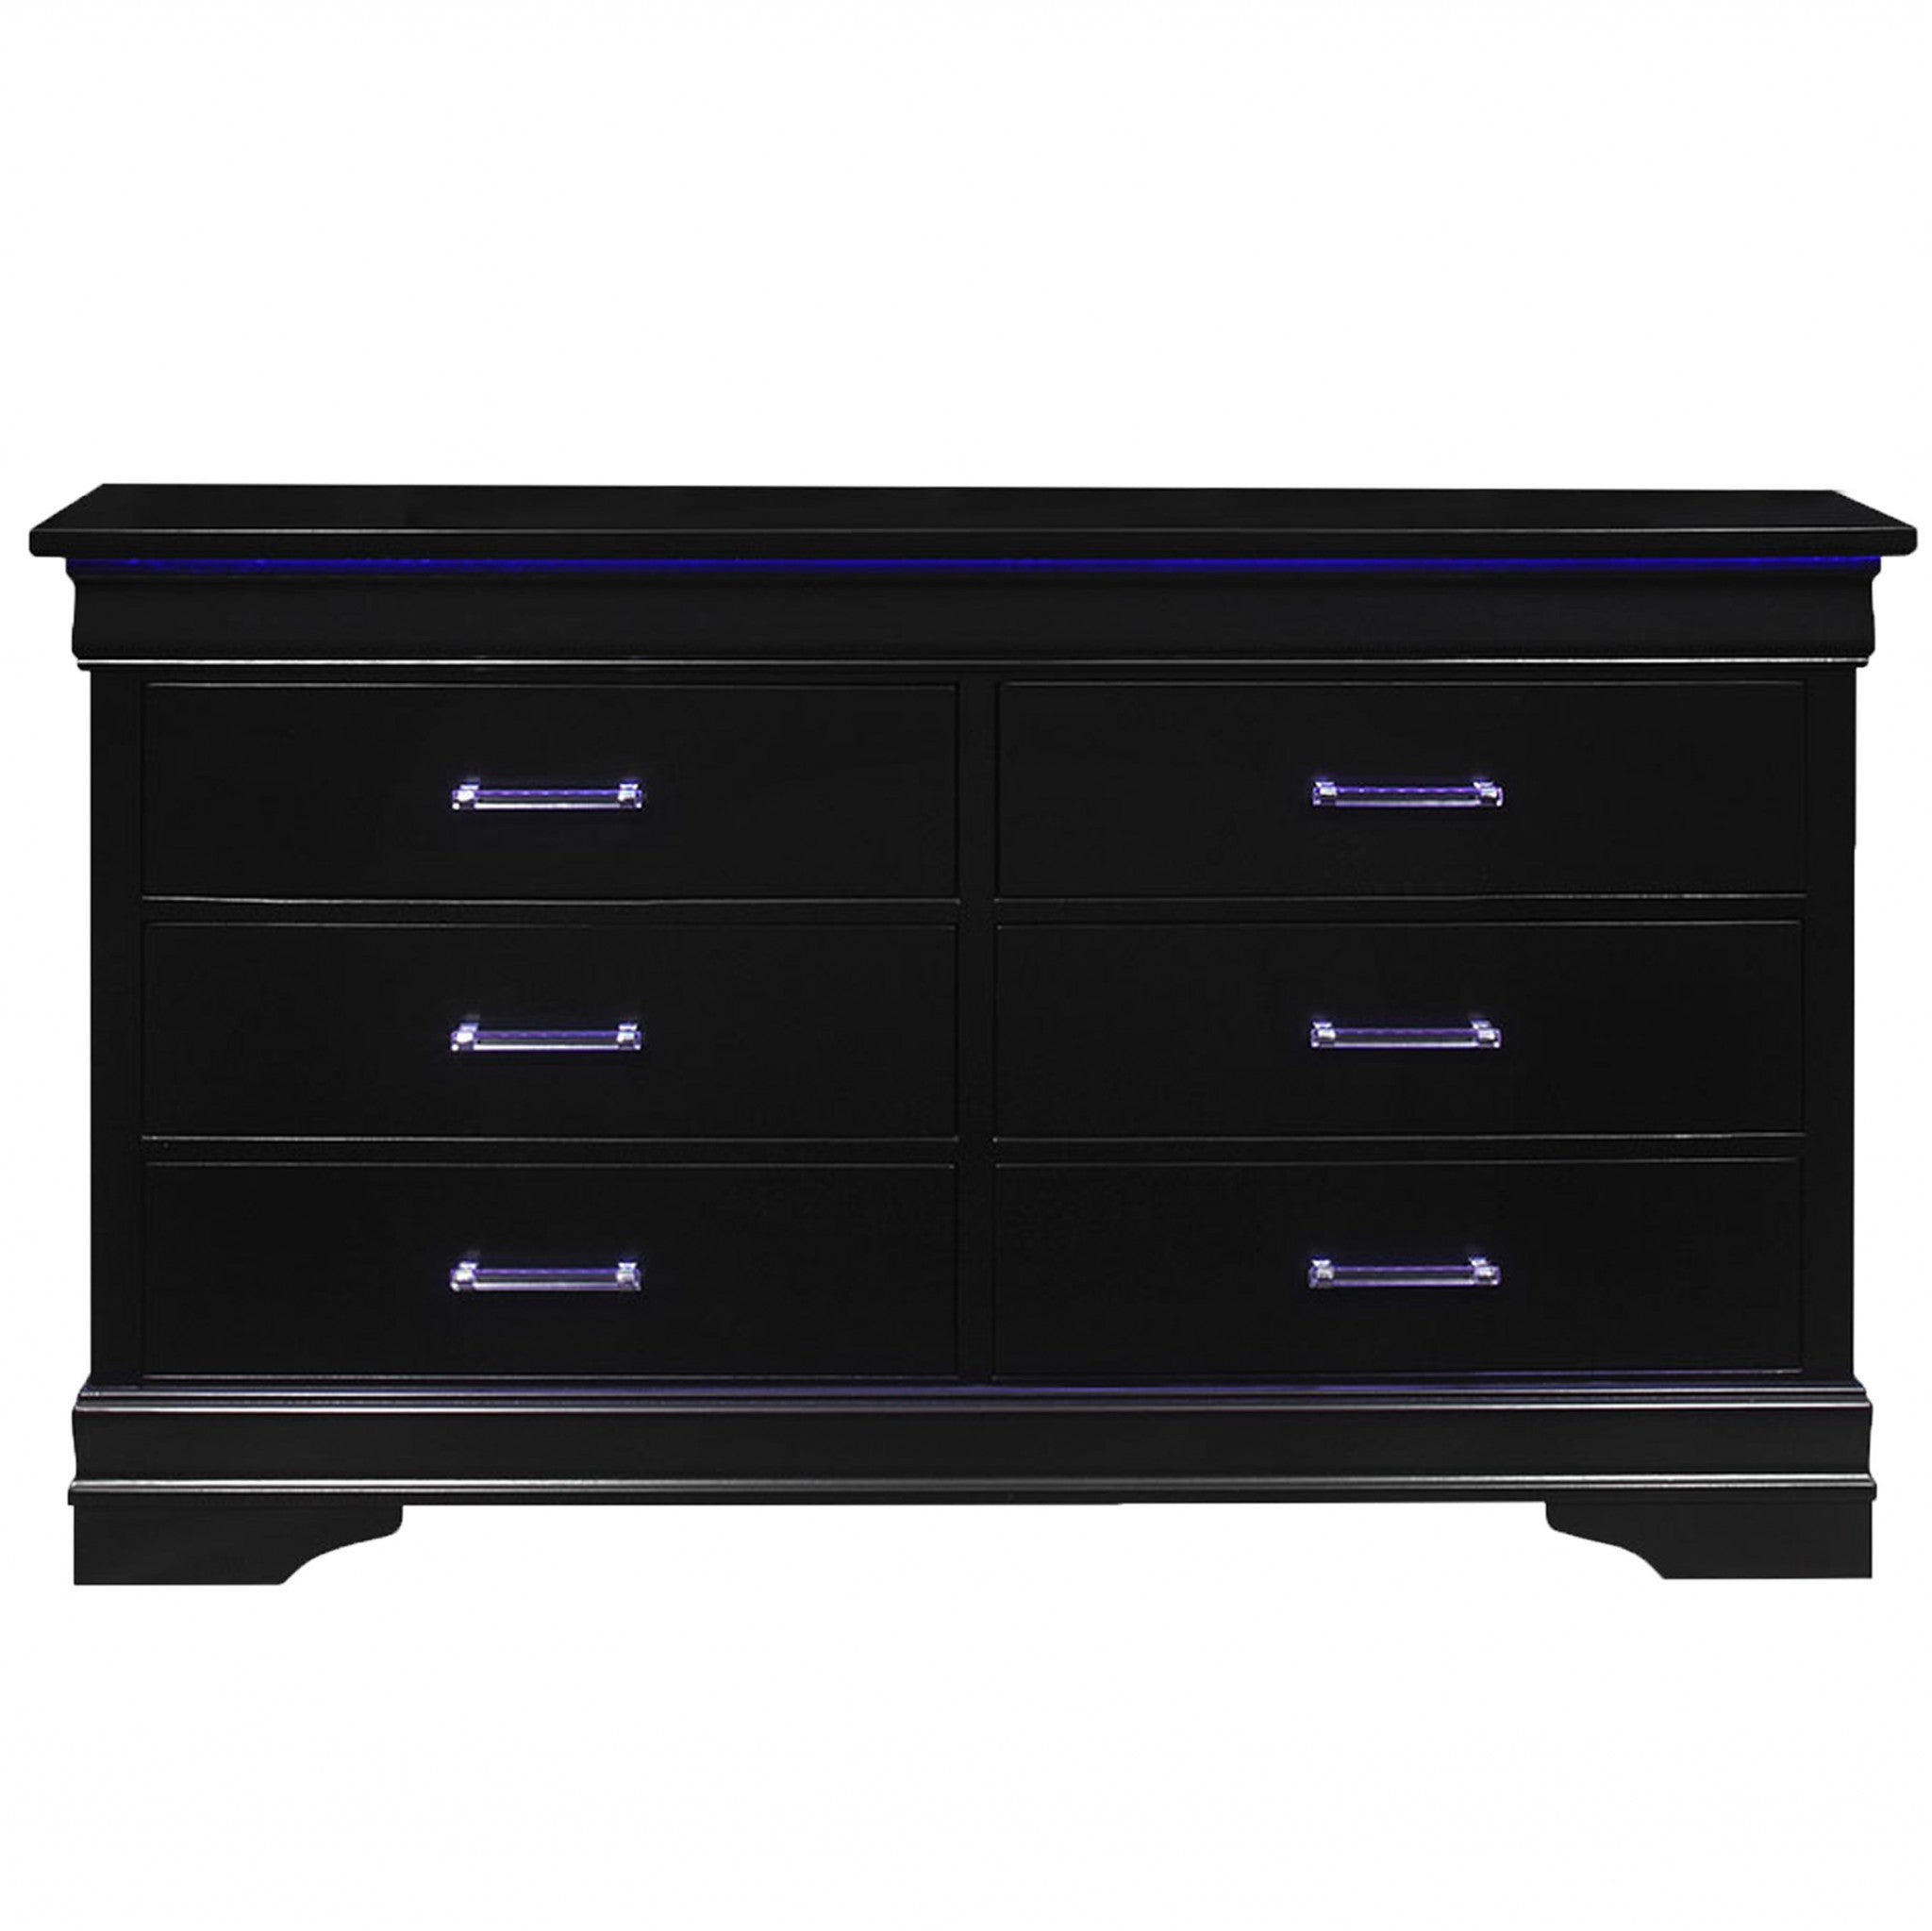 59" Black Solid Wood Six Drawer Double Dresser with LED Default Title